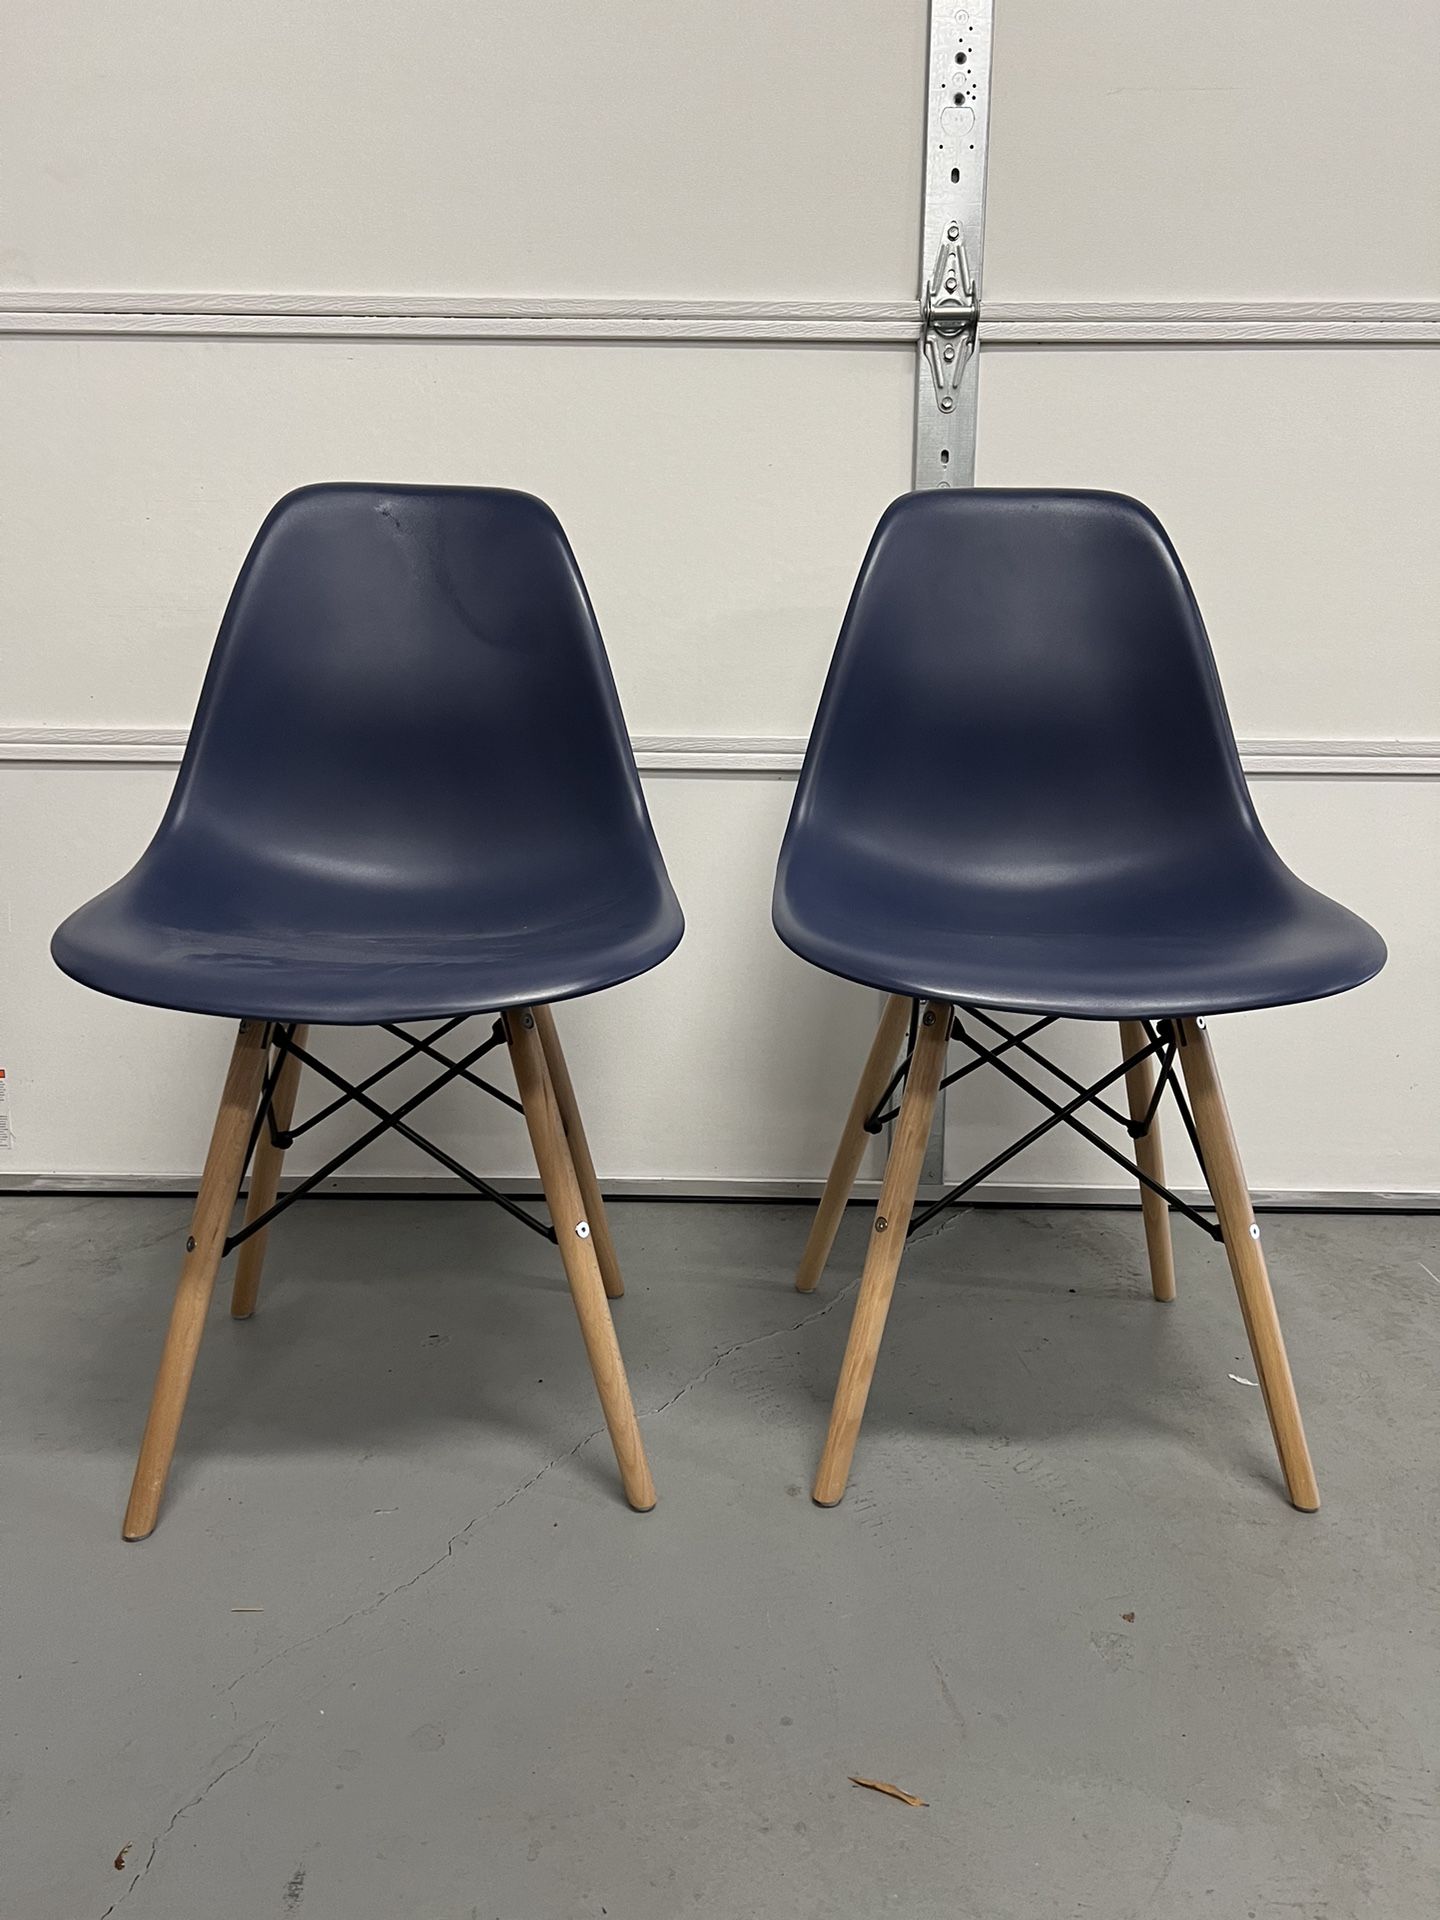 Flash Furniture Elon Series Navy Plastic Chair with Wooden Legs New Assembled Set of 2 $80.00